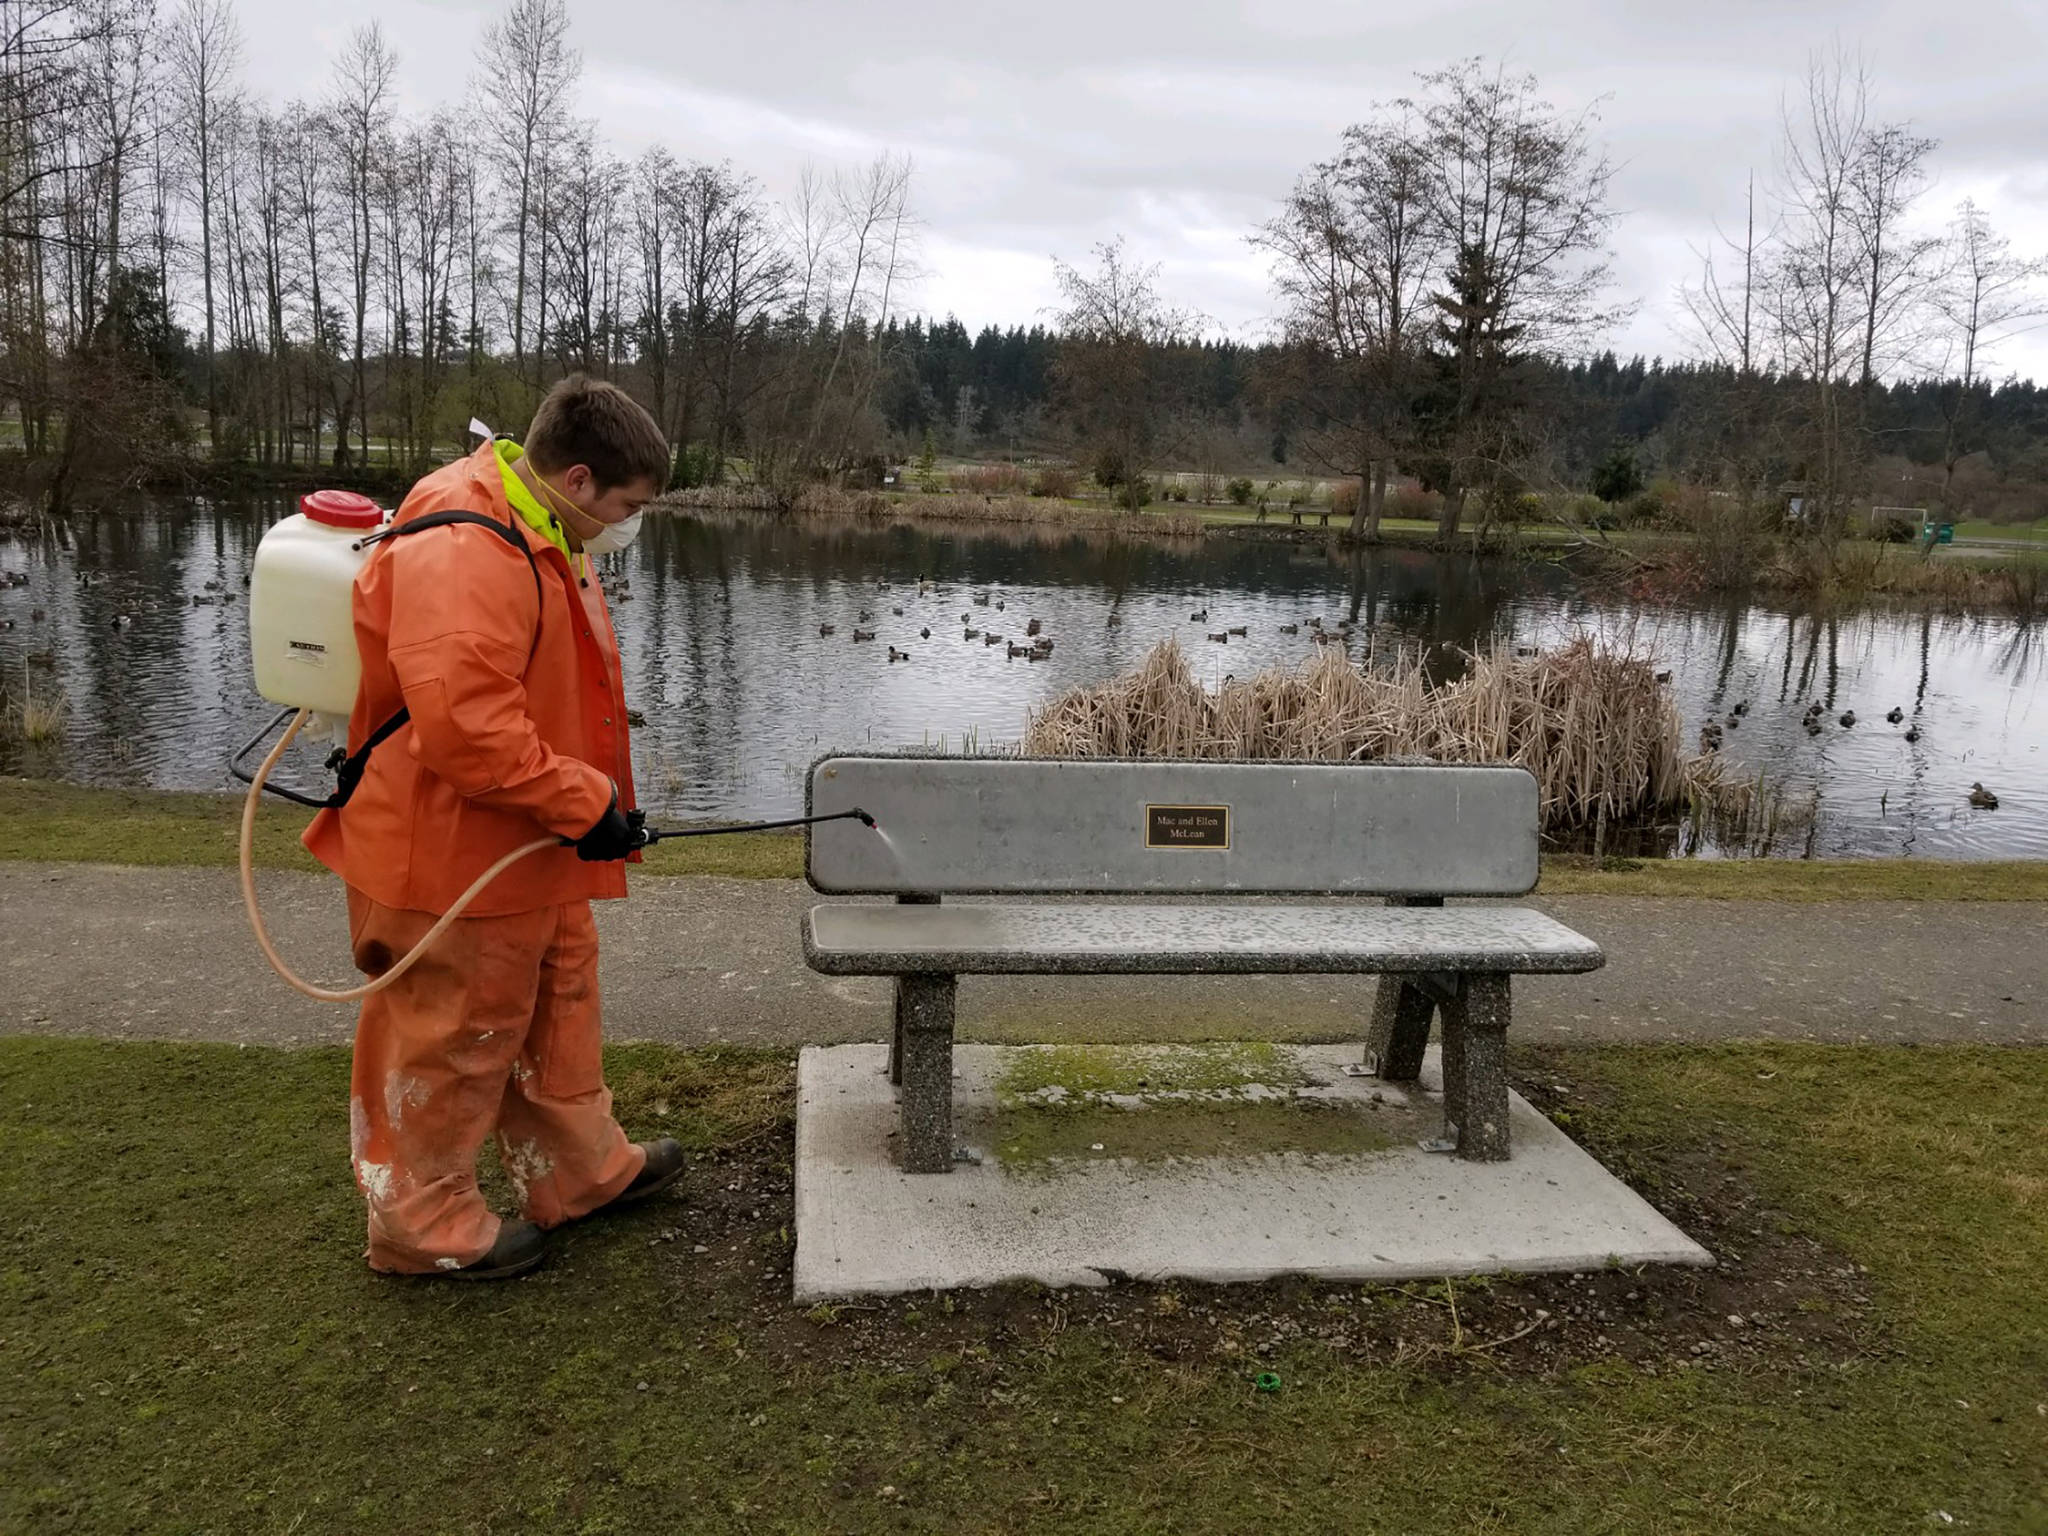 Michael Latimer, a City of Sequim Public Works crew member, sanitizes a city bench. (Photo courtesy of City of Sequim)